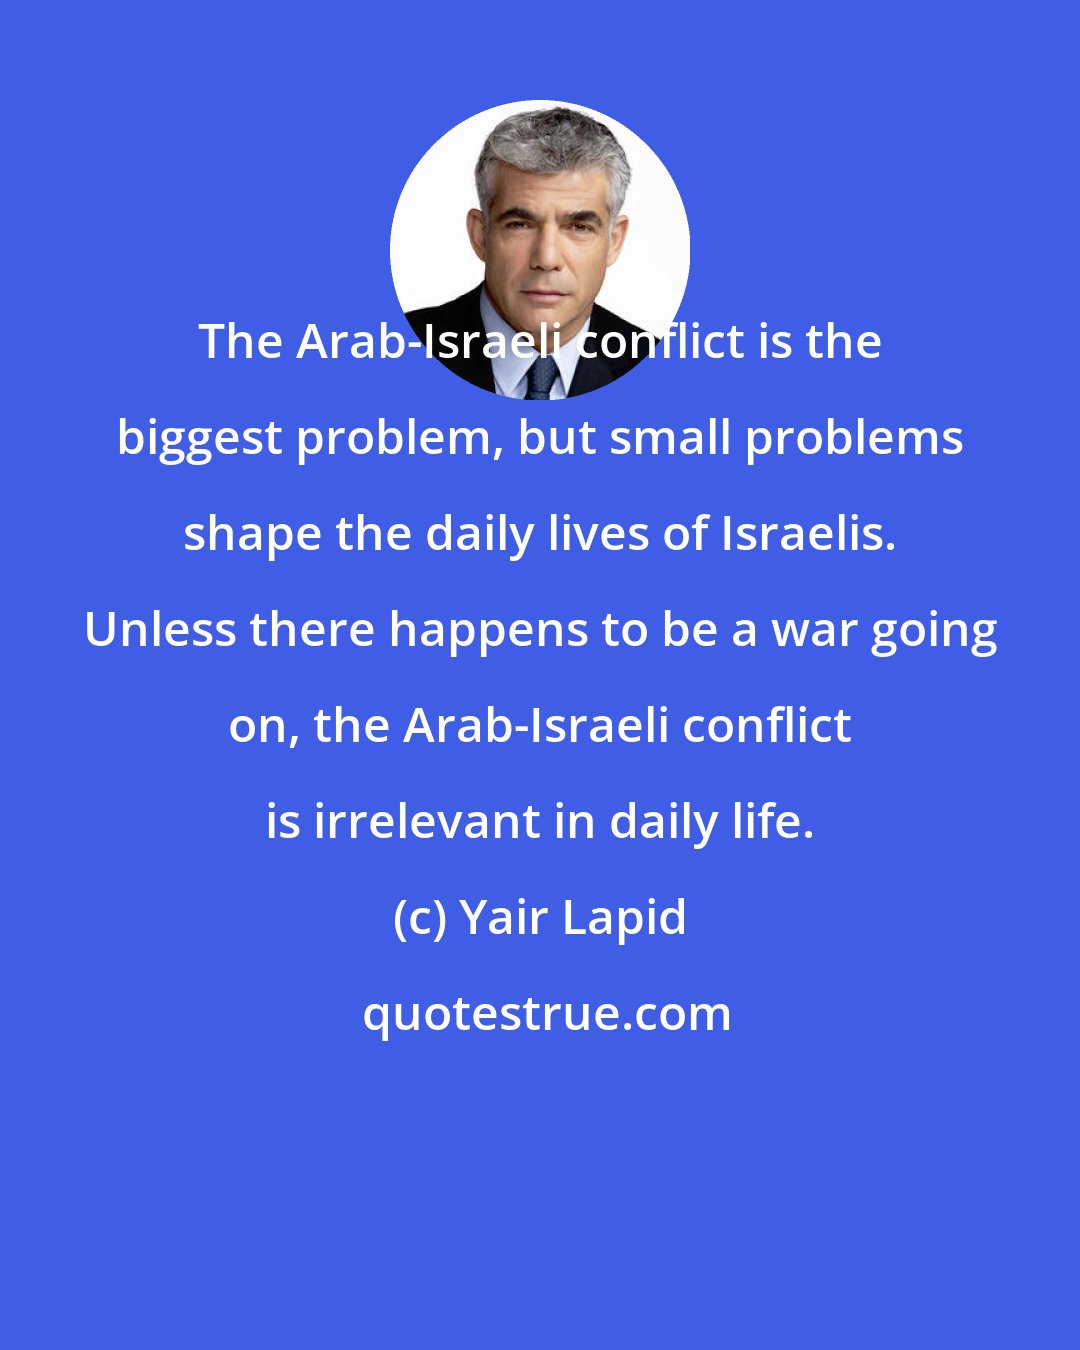 Yair Lapid: The Arab-Israeli conflict is the biggest problem, but small problems shape the daily lives of Israelis. Unless there happens to be a war going on, the Arab-Israeli conflict is irrelevant in daily life.